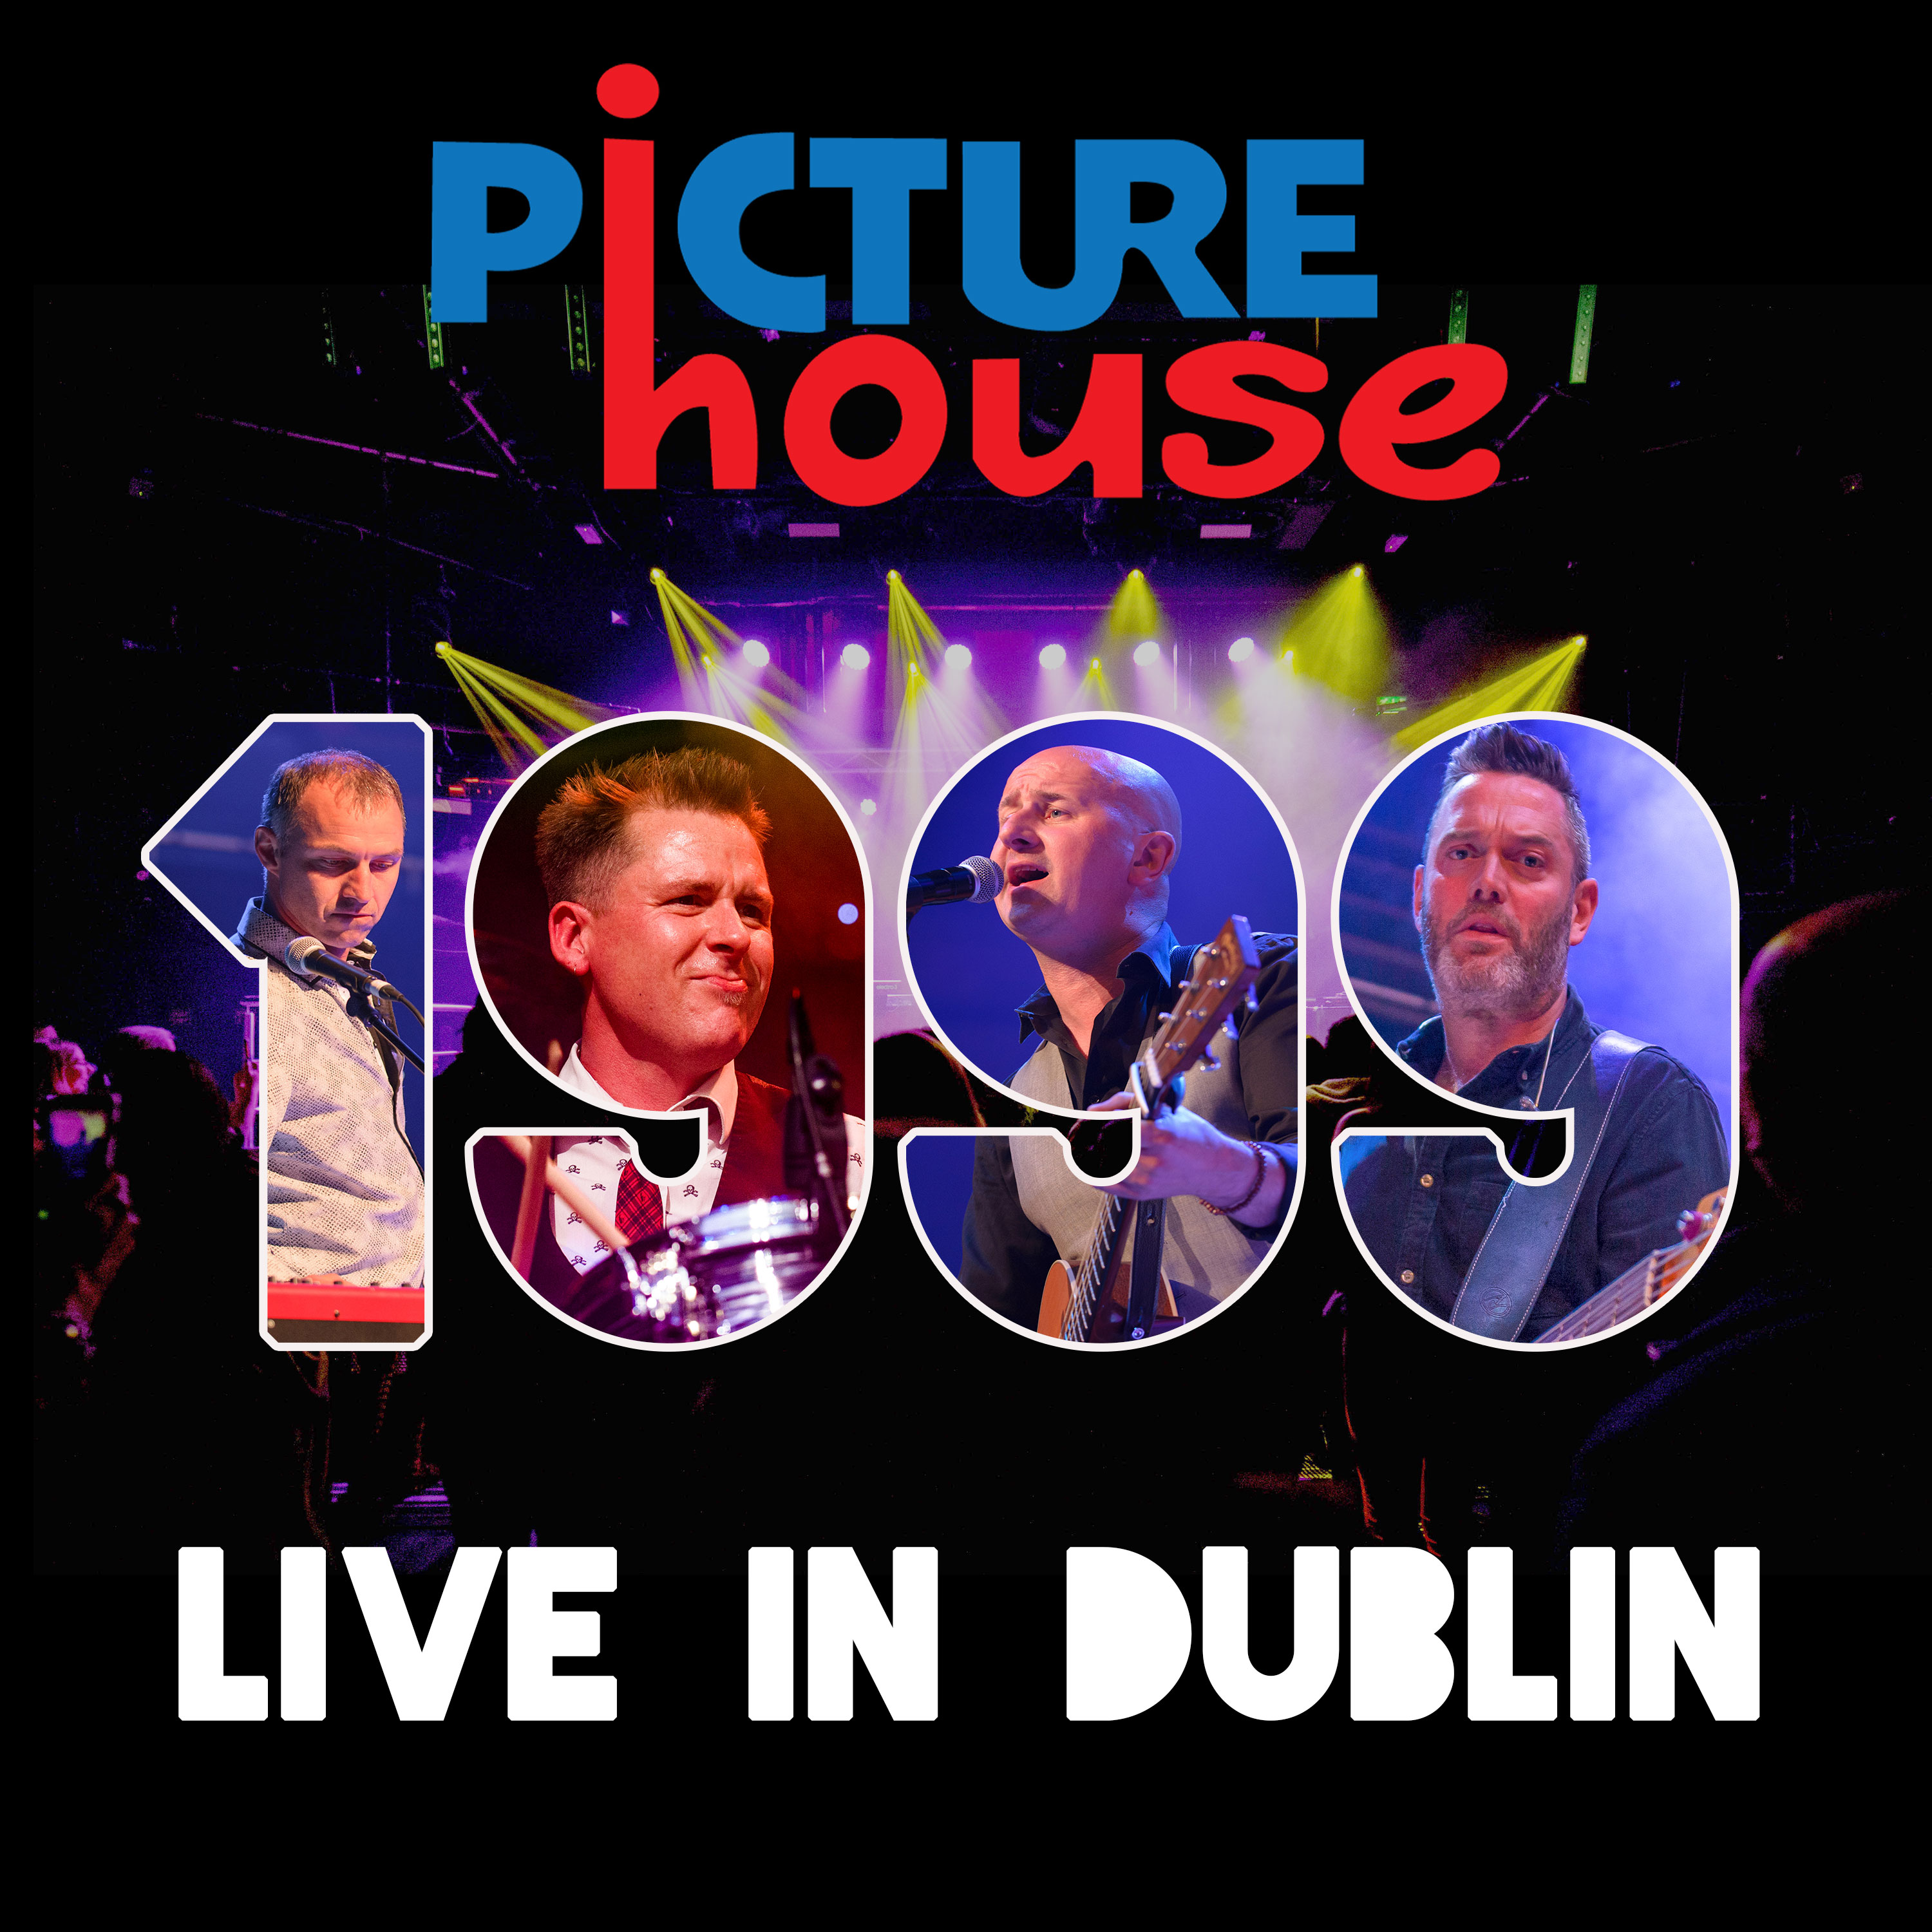 1999 – Live in Dublin – PictureHouse